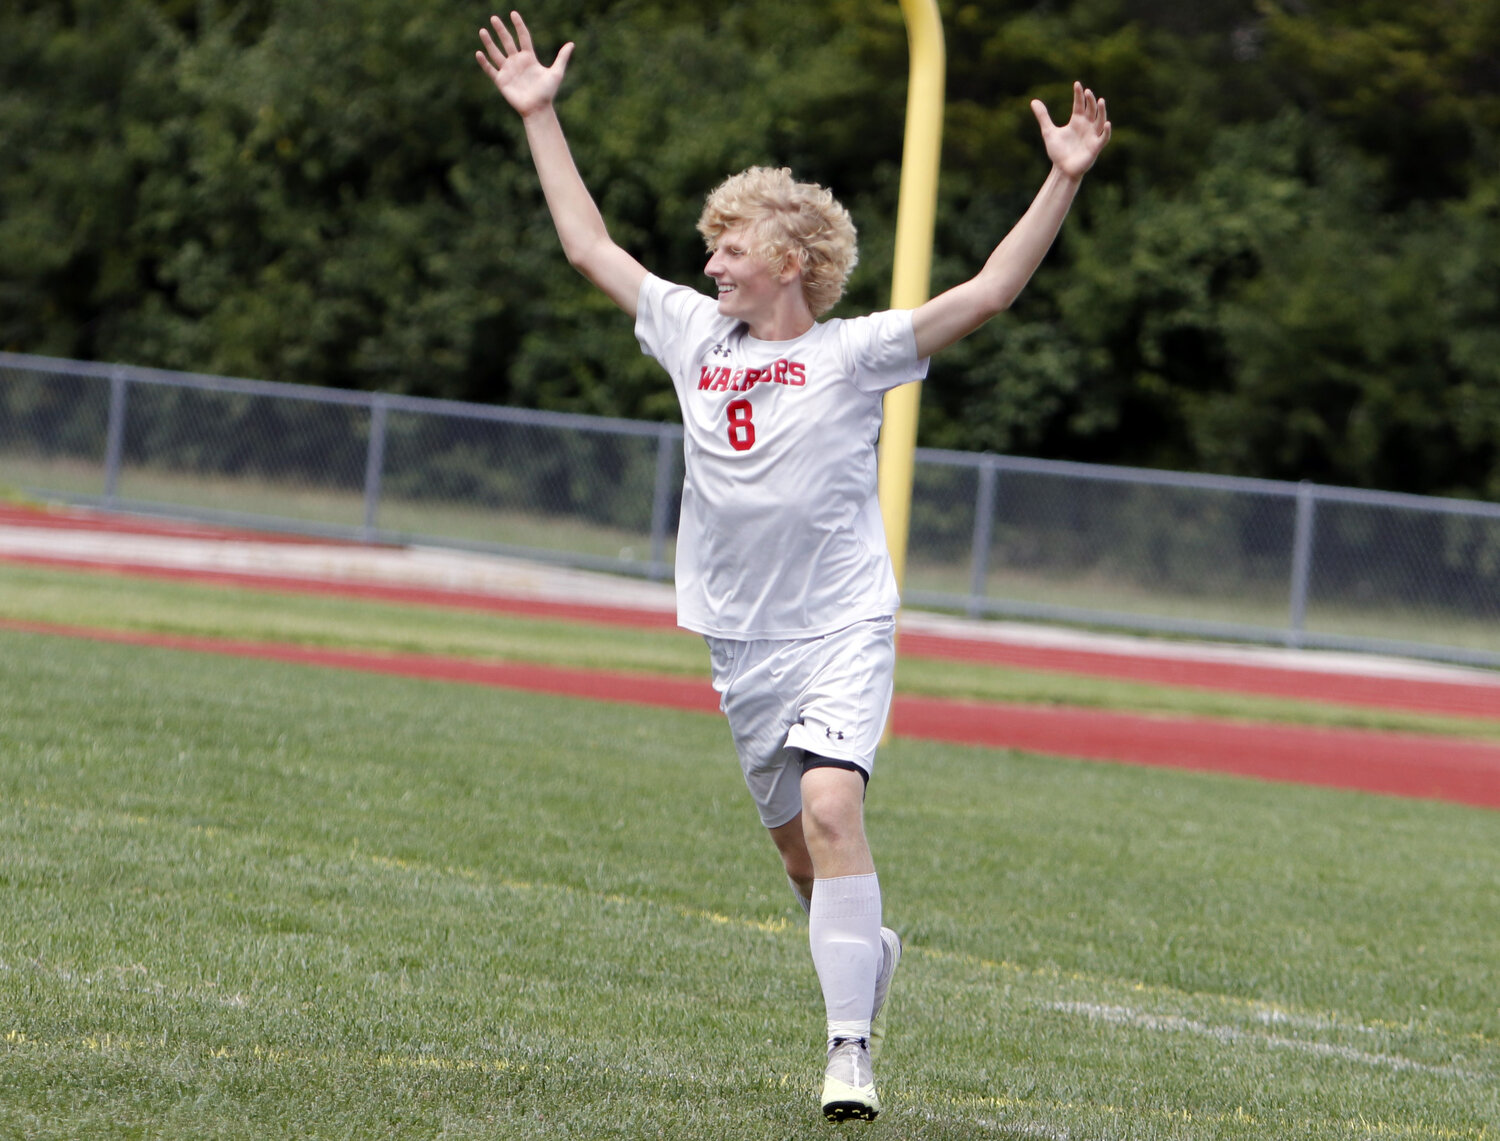 Isaac Wagner celebrates after scoring a goal in the second half of last weekend's win over Wright City.